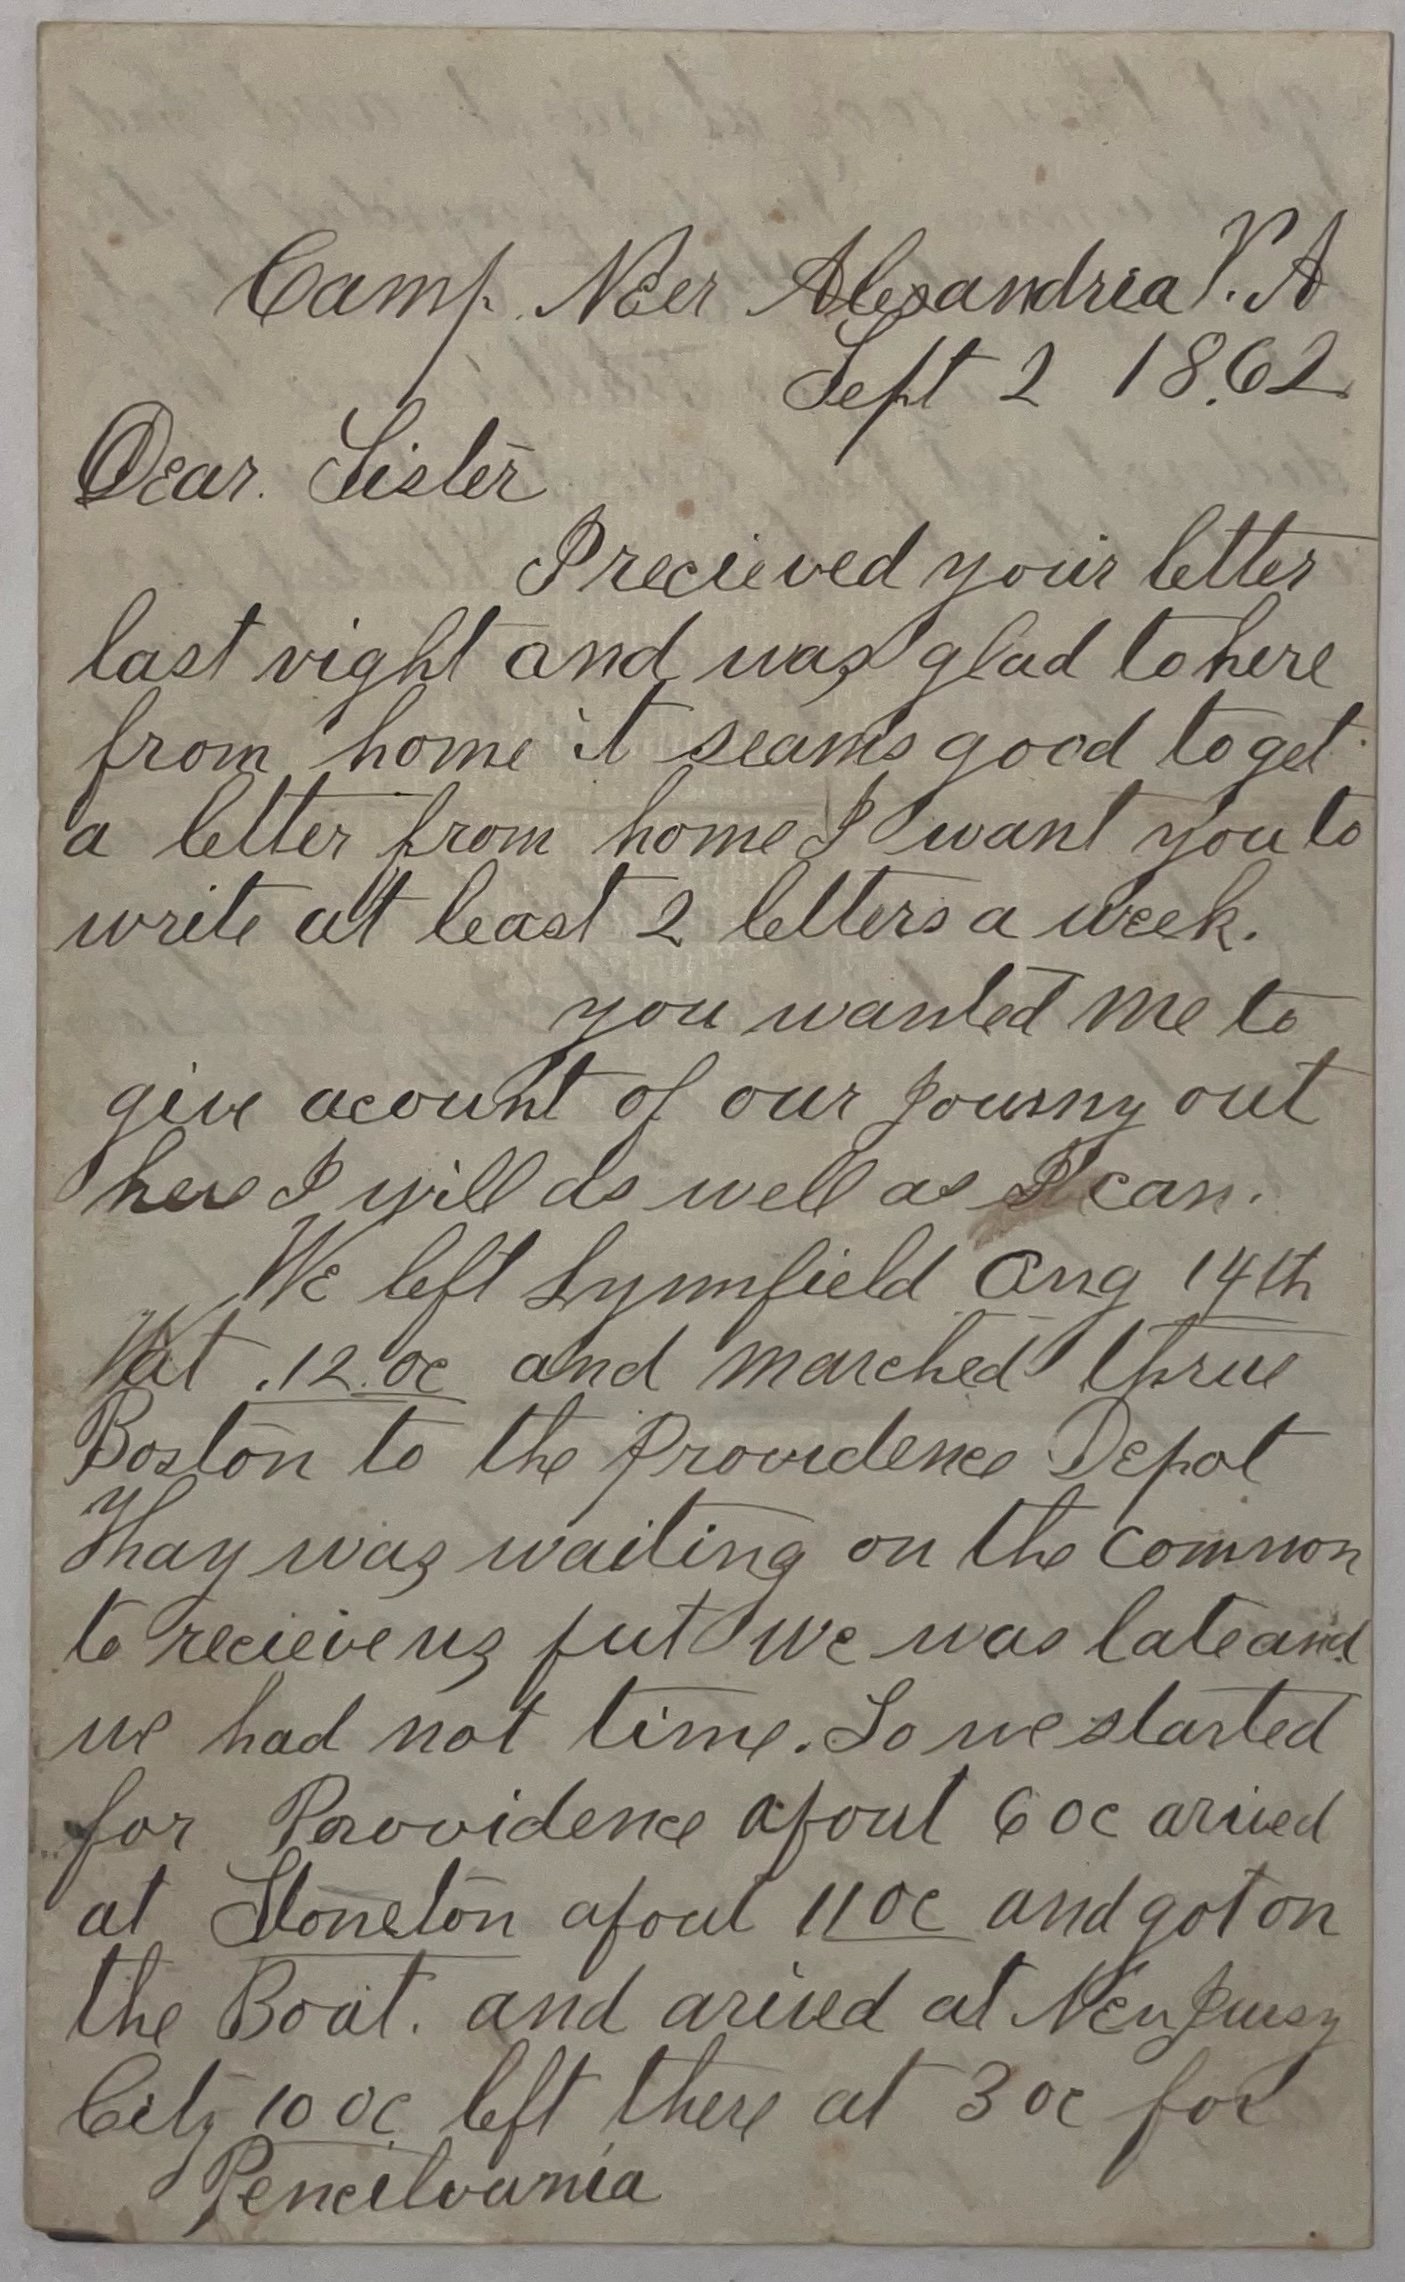 Civil War soldier writing from Alexandria Virginia page 1